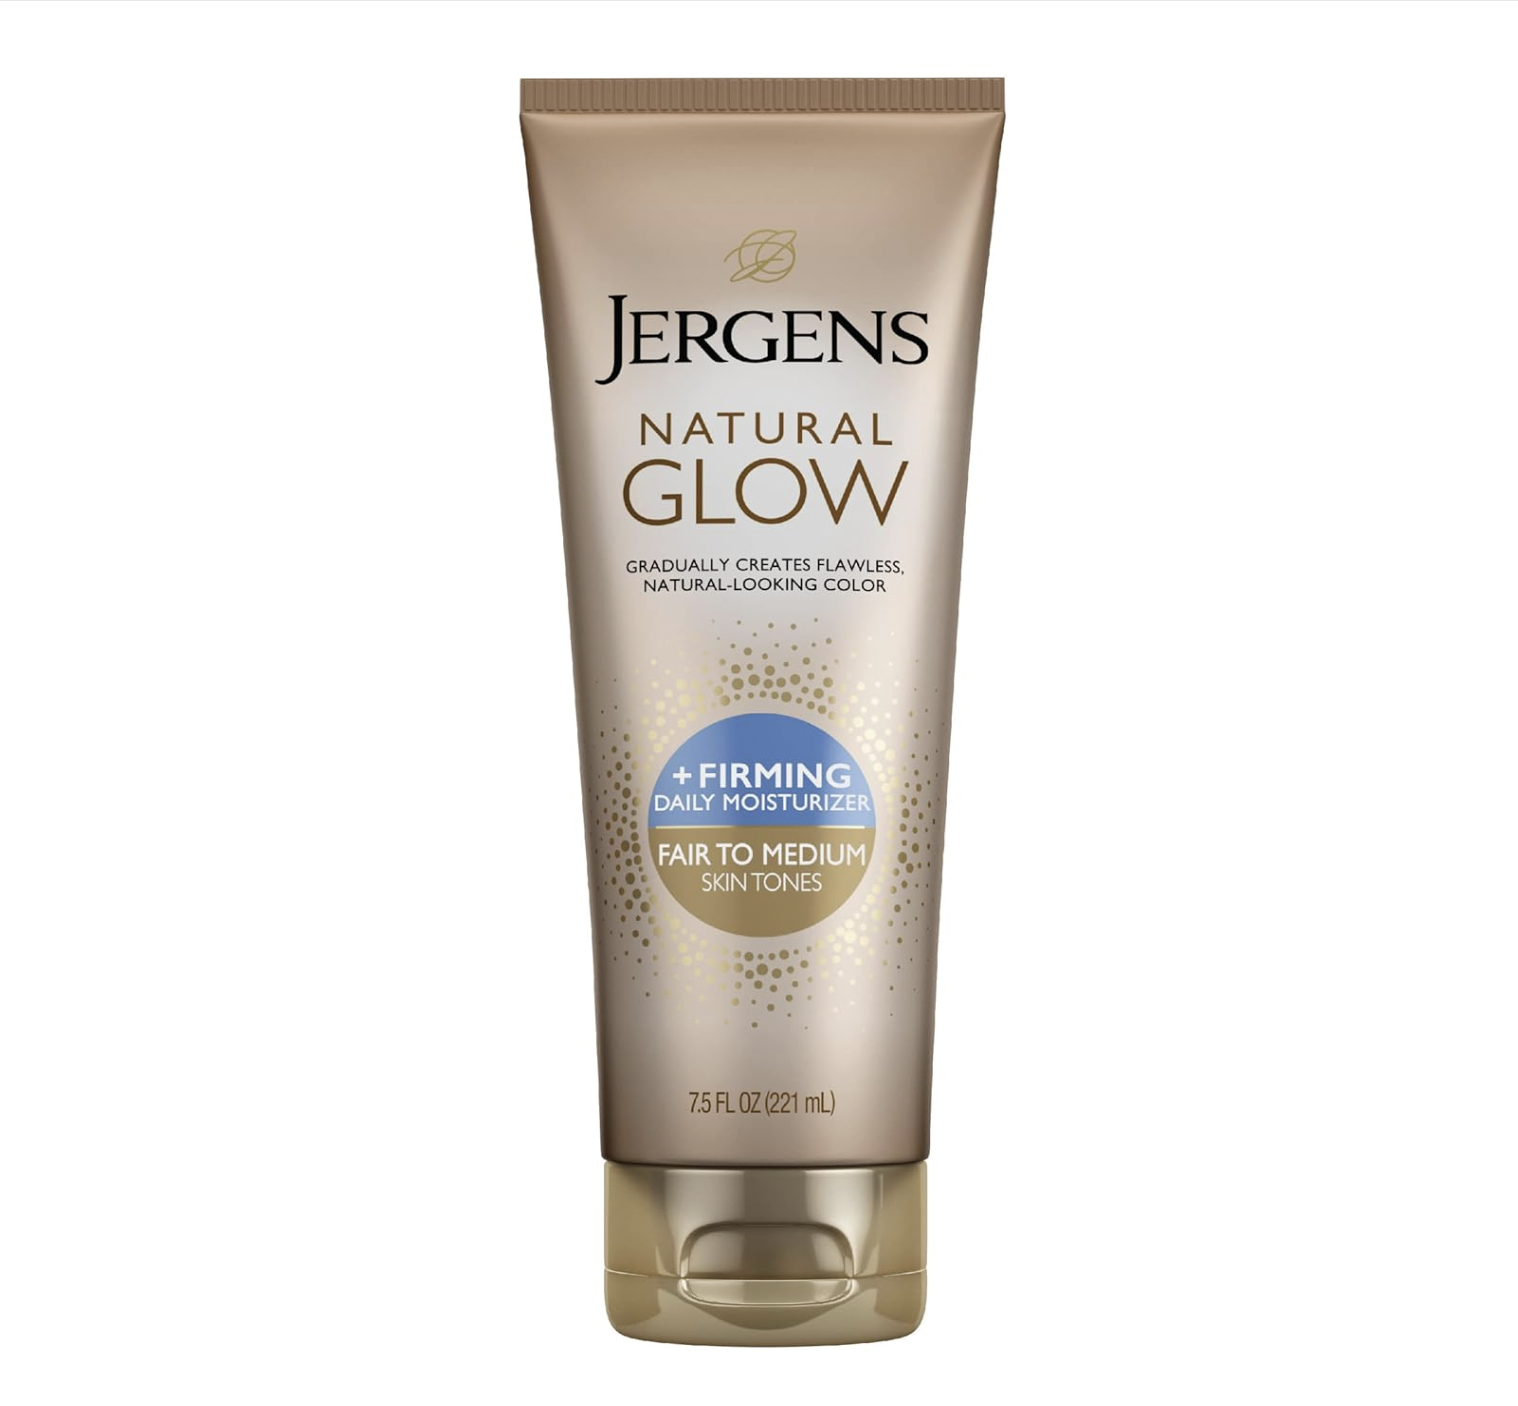 Jergens Natural Glow +FIRMING